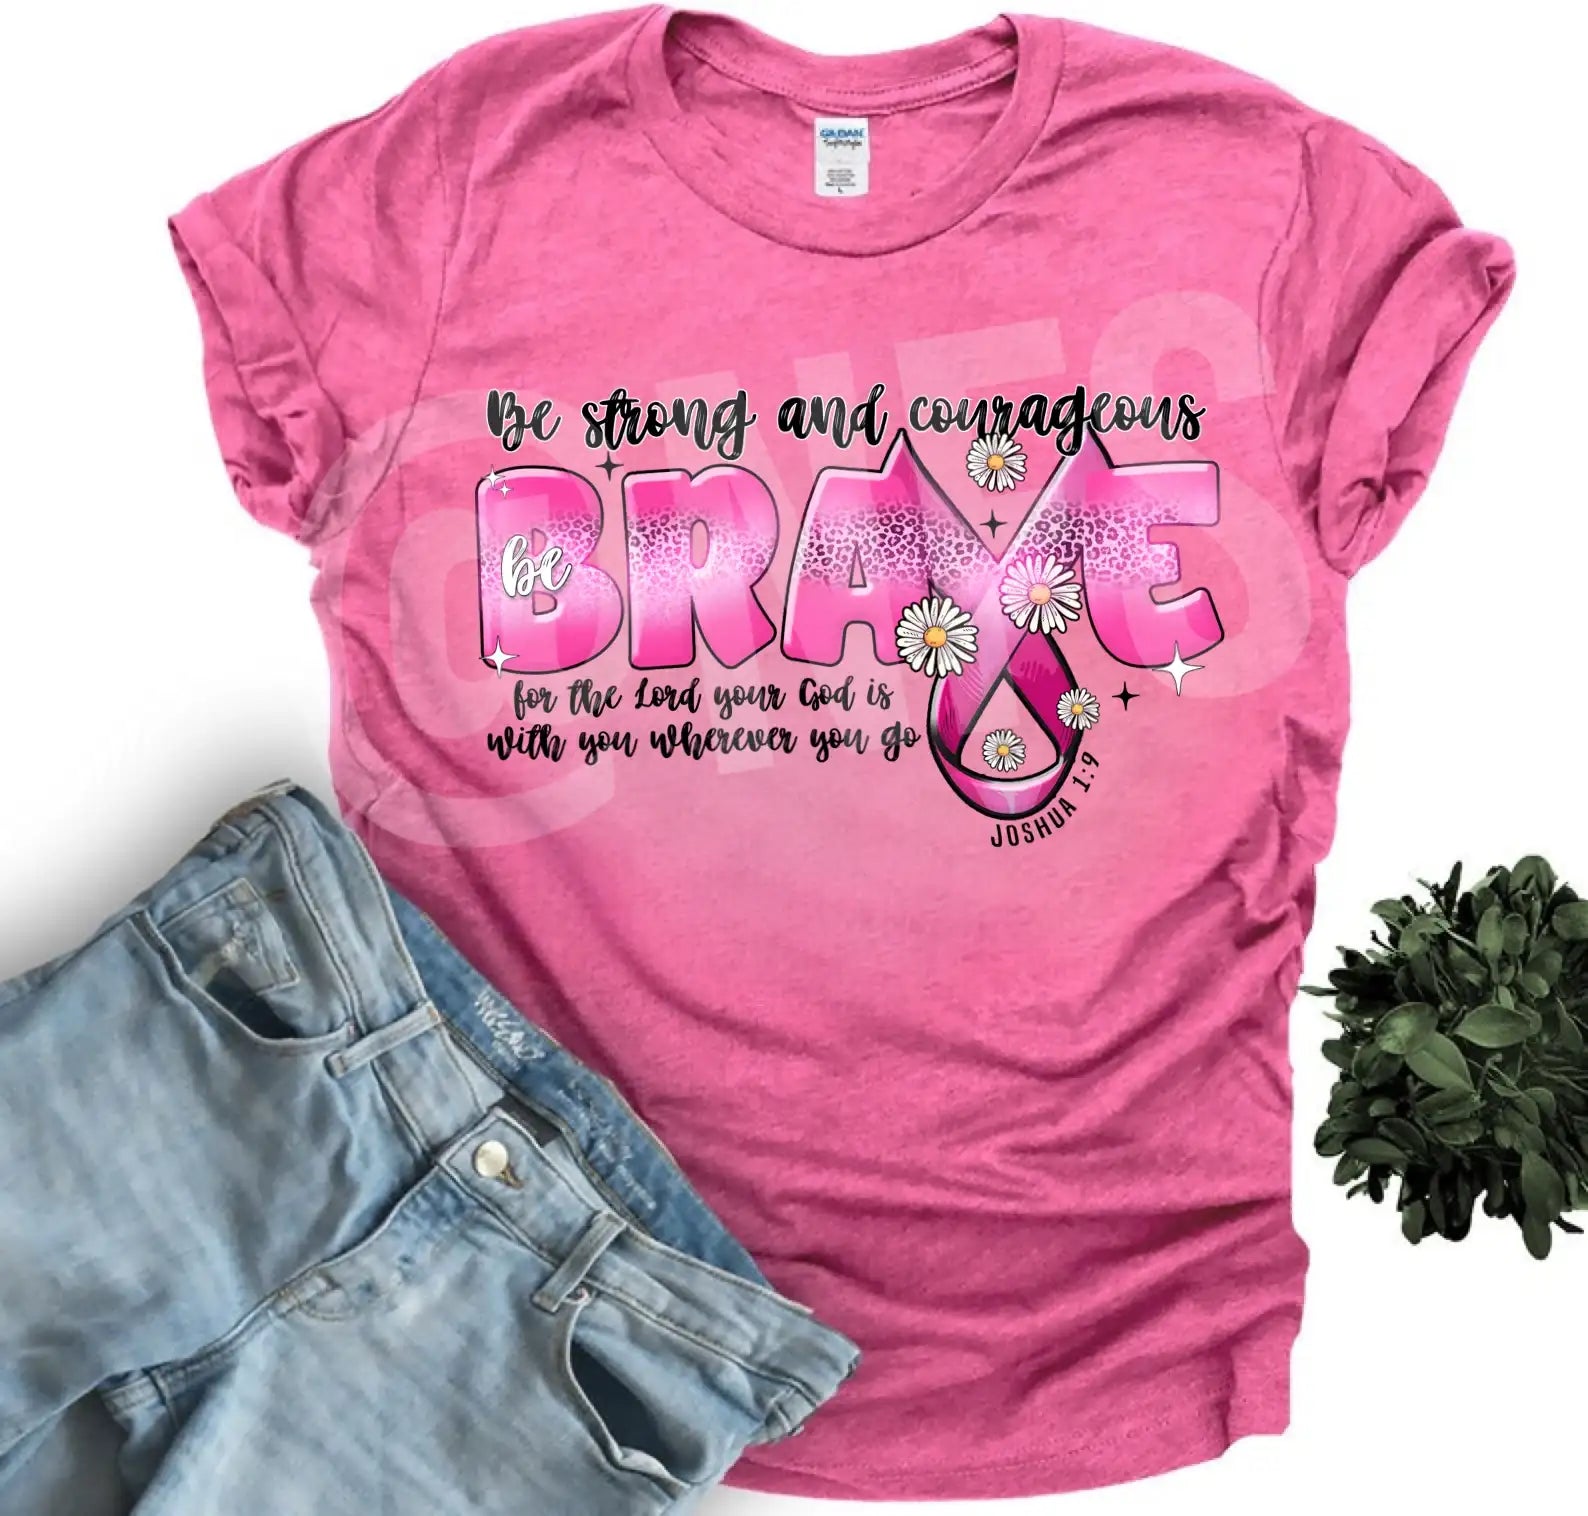 With our “Brave Tee,” you have a chance to demonstrate your strength and endorsement of Breast Cancer Awareness